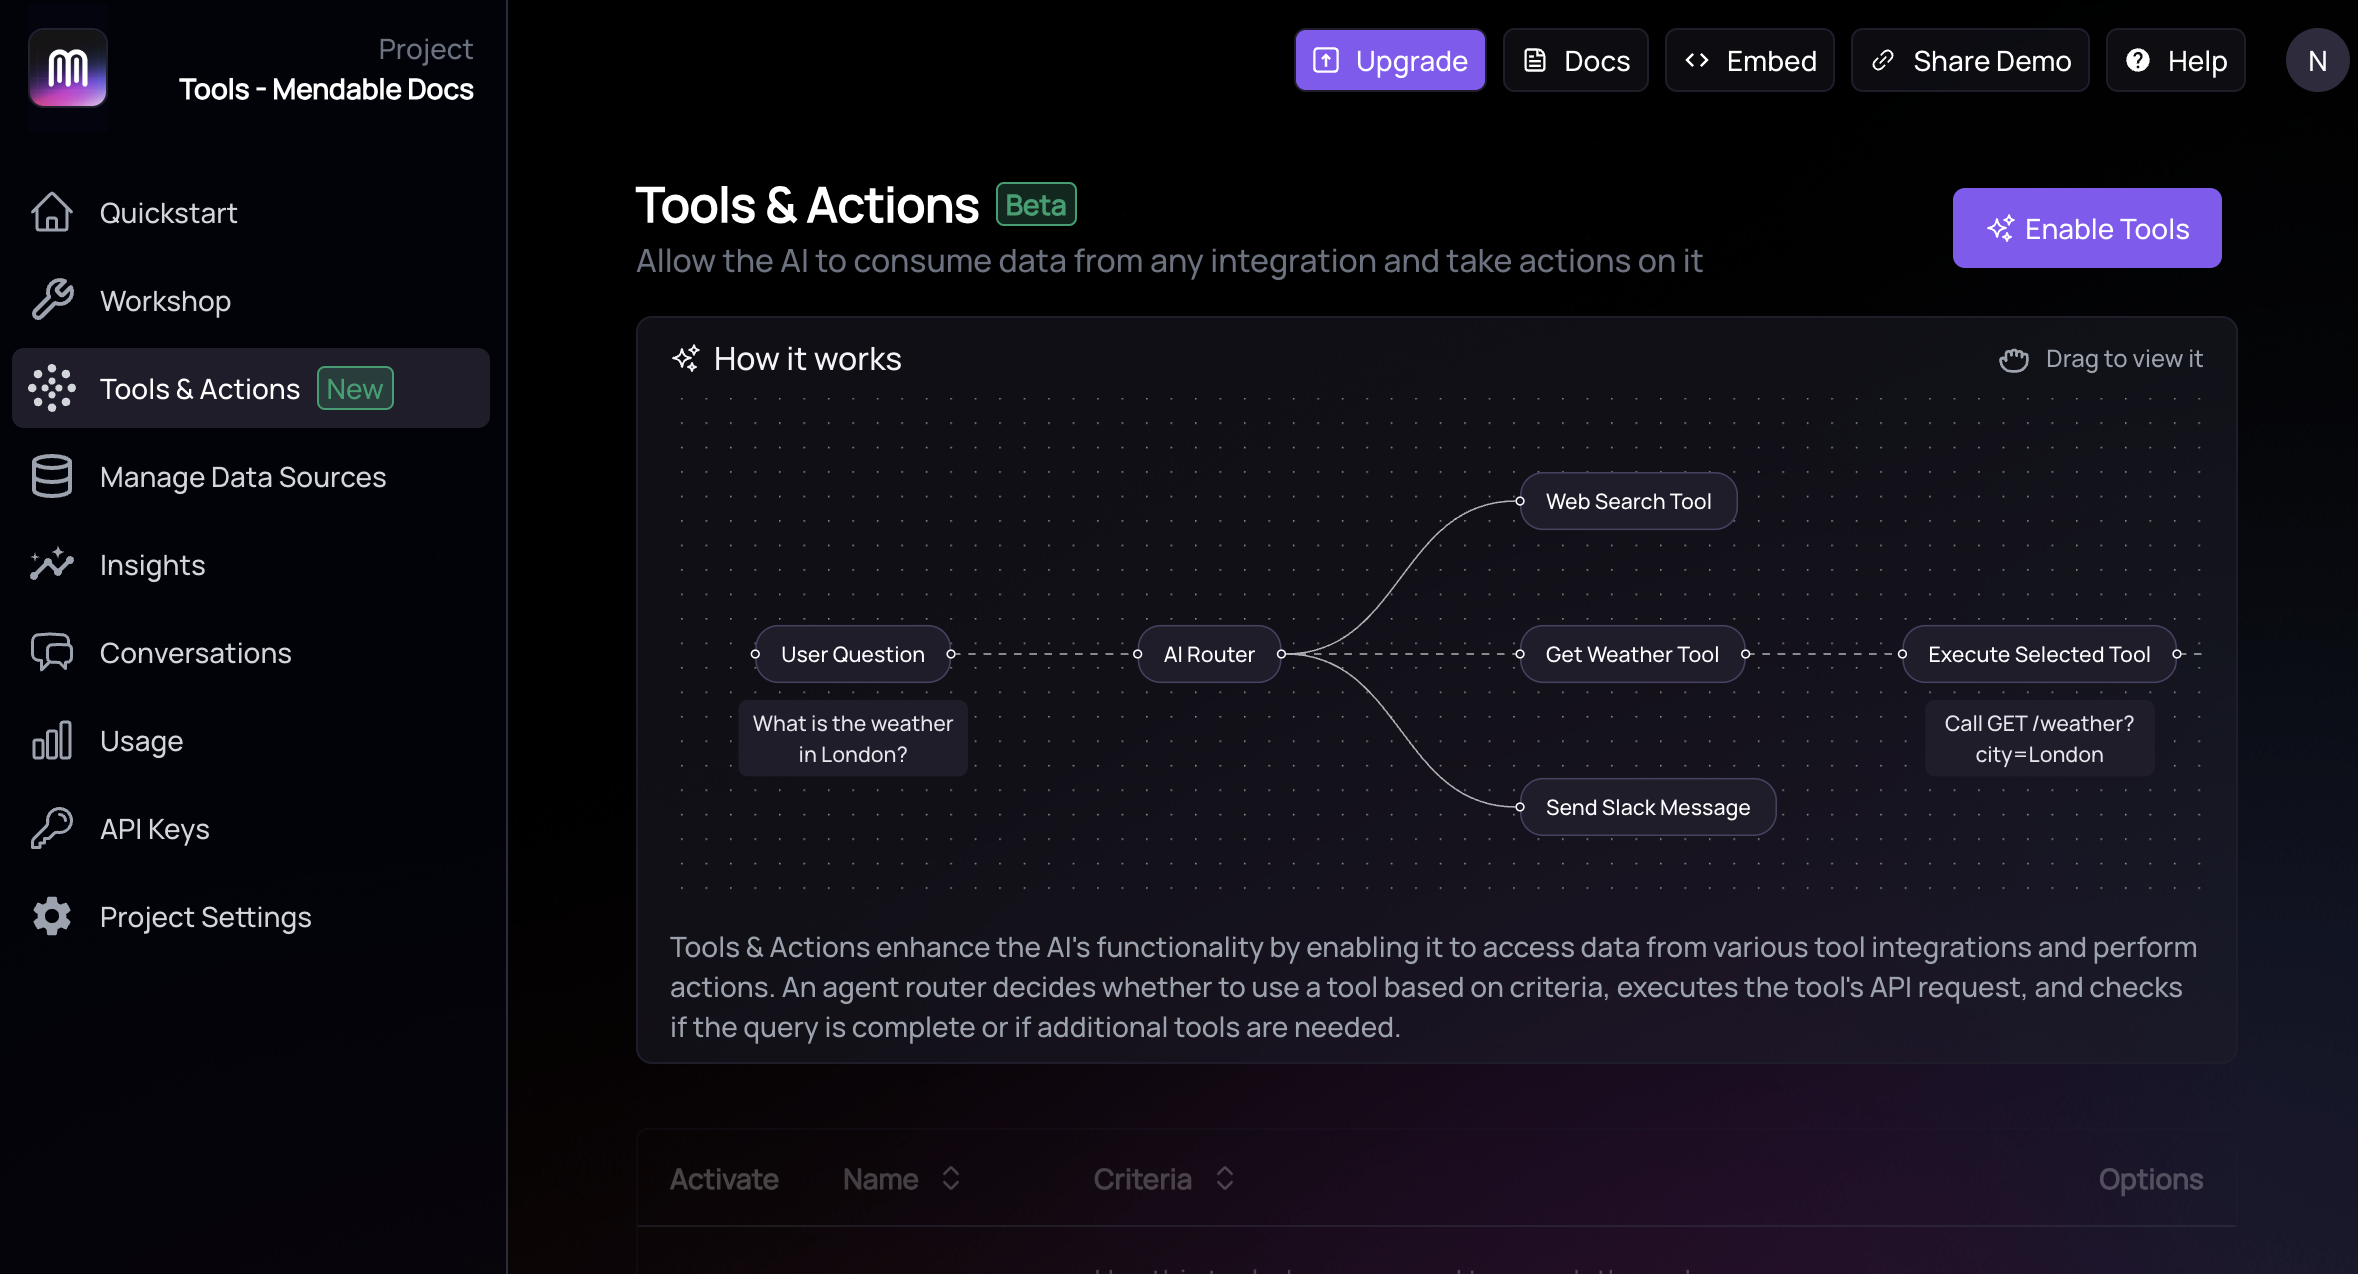 Tools & Actions Tab